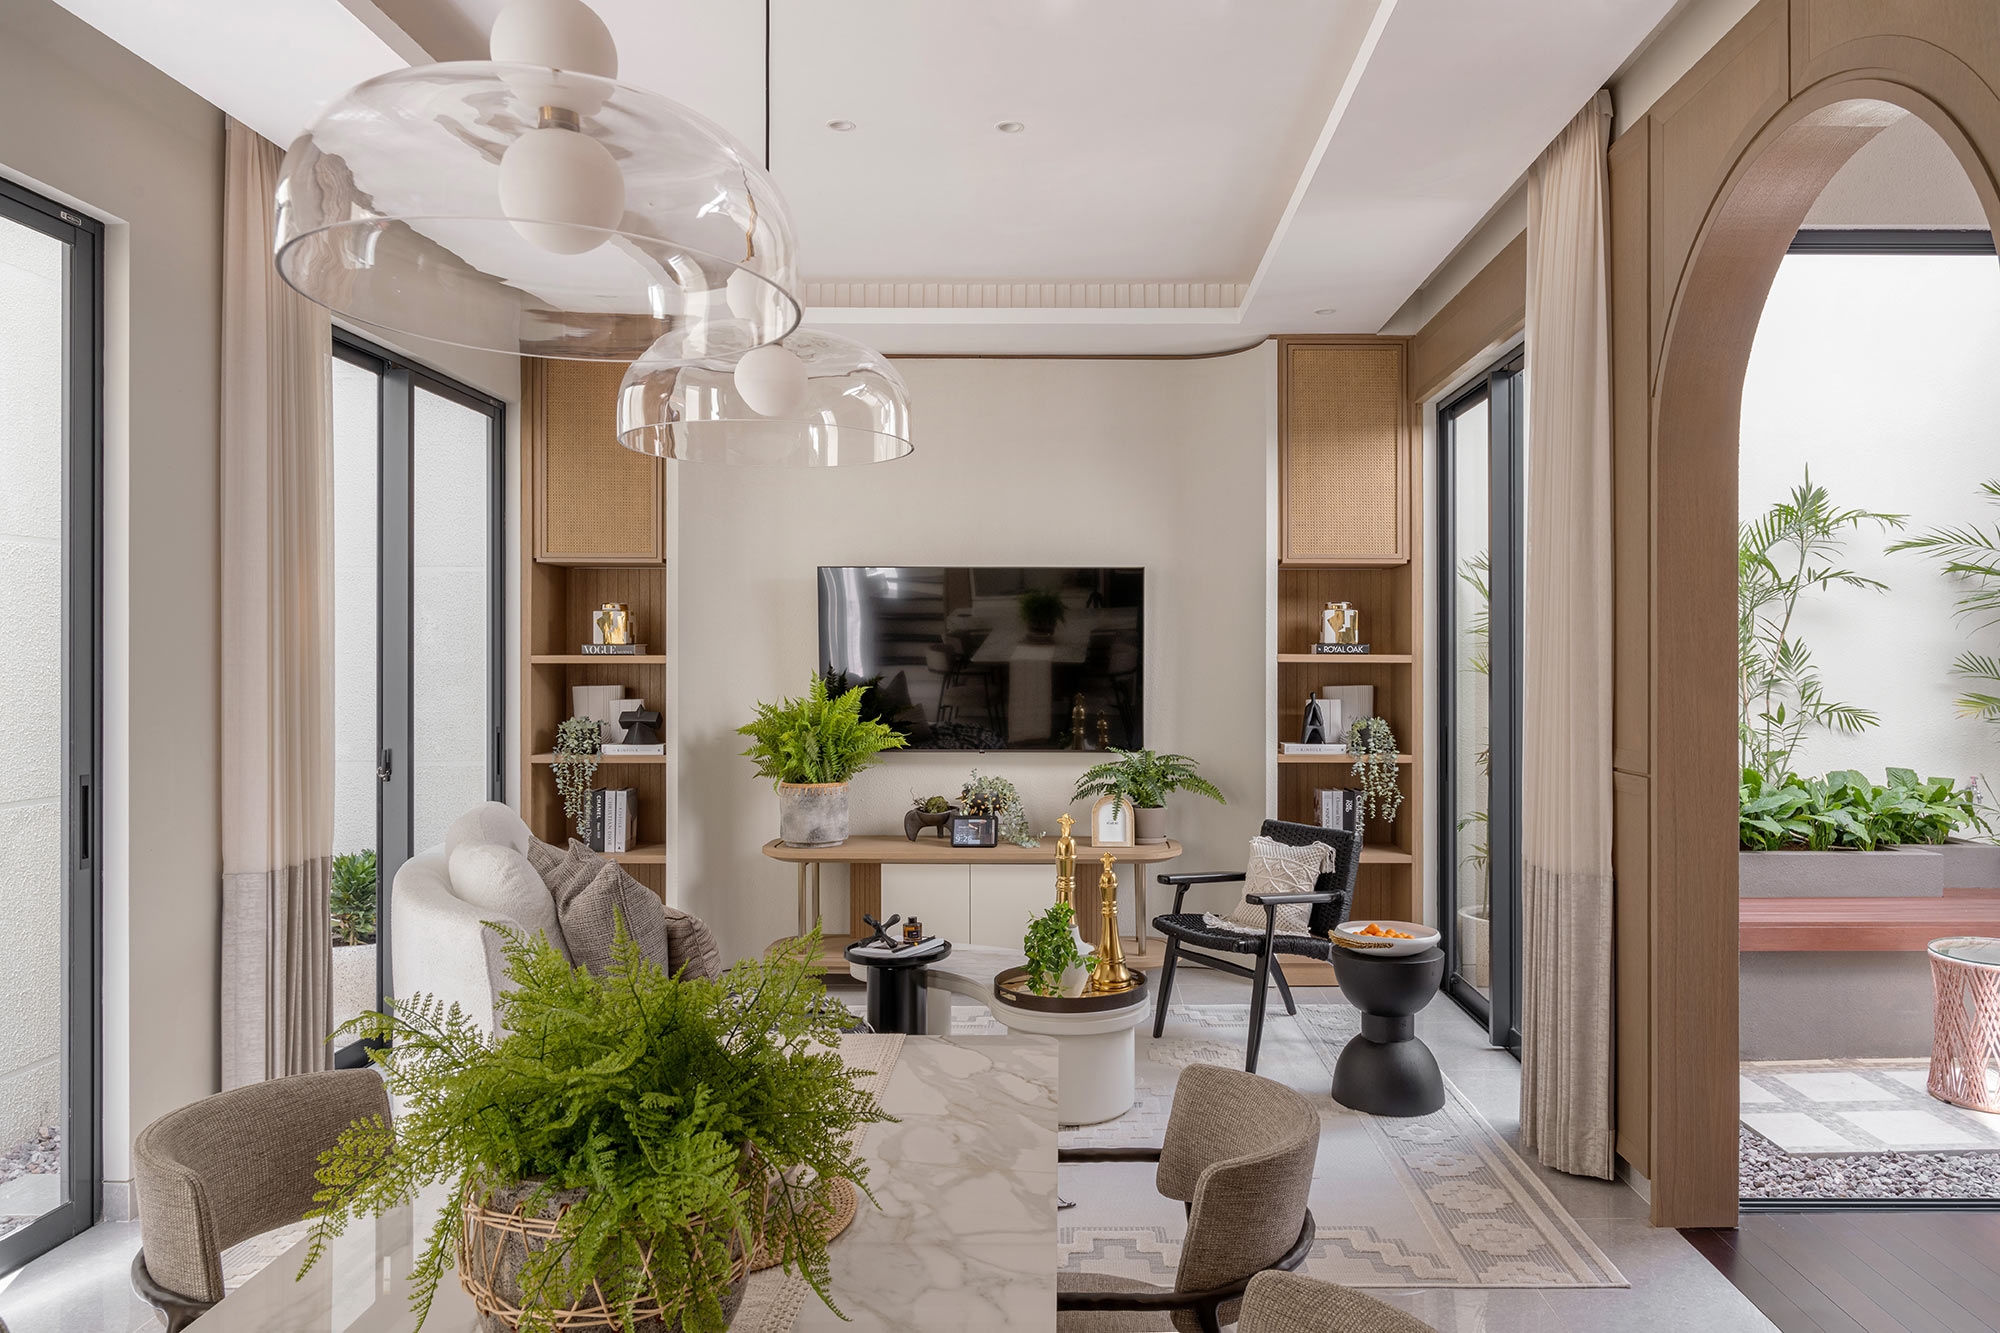 Image of Showhome by Align 3 in All in beige: a personal kitchen that blends styles by House Loves - Cosentino